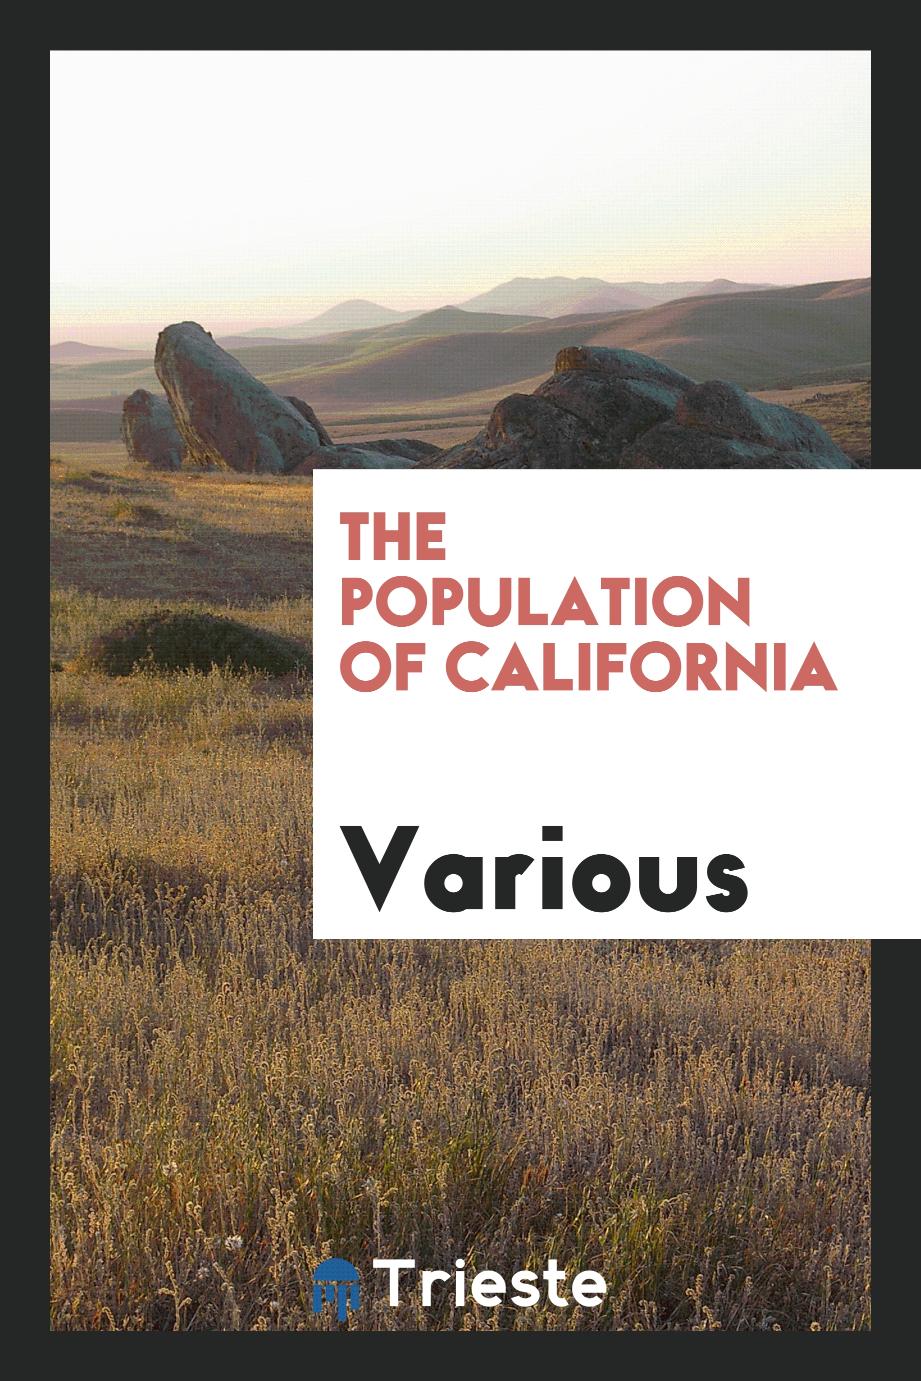 The population of California